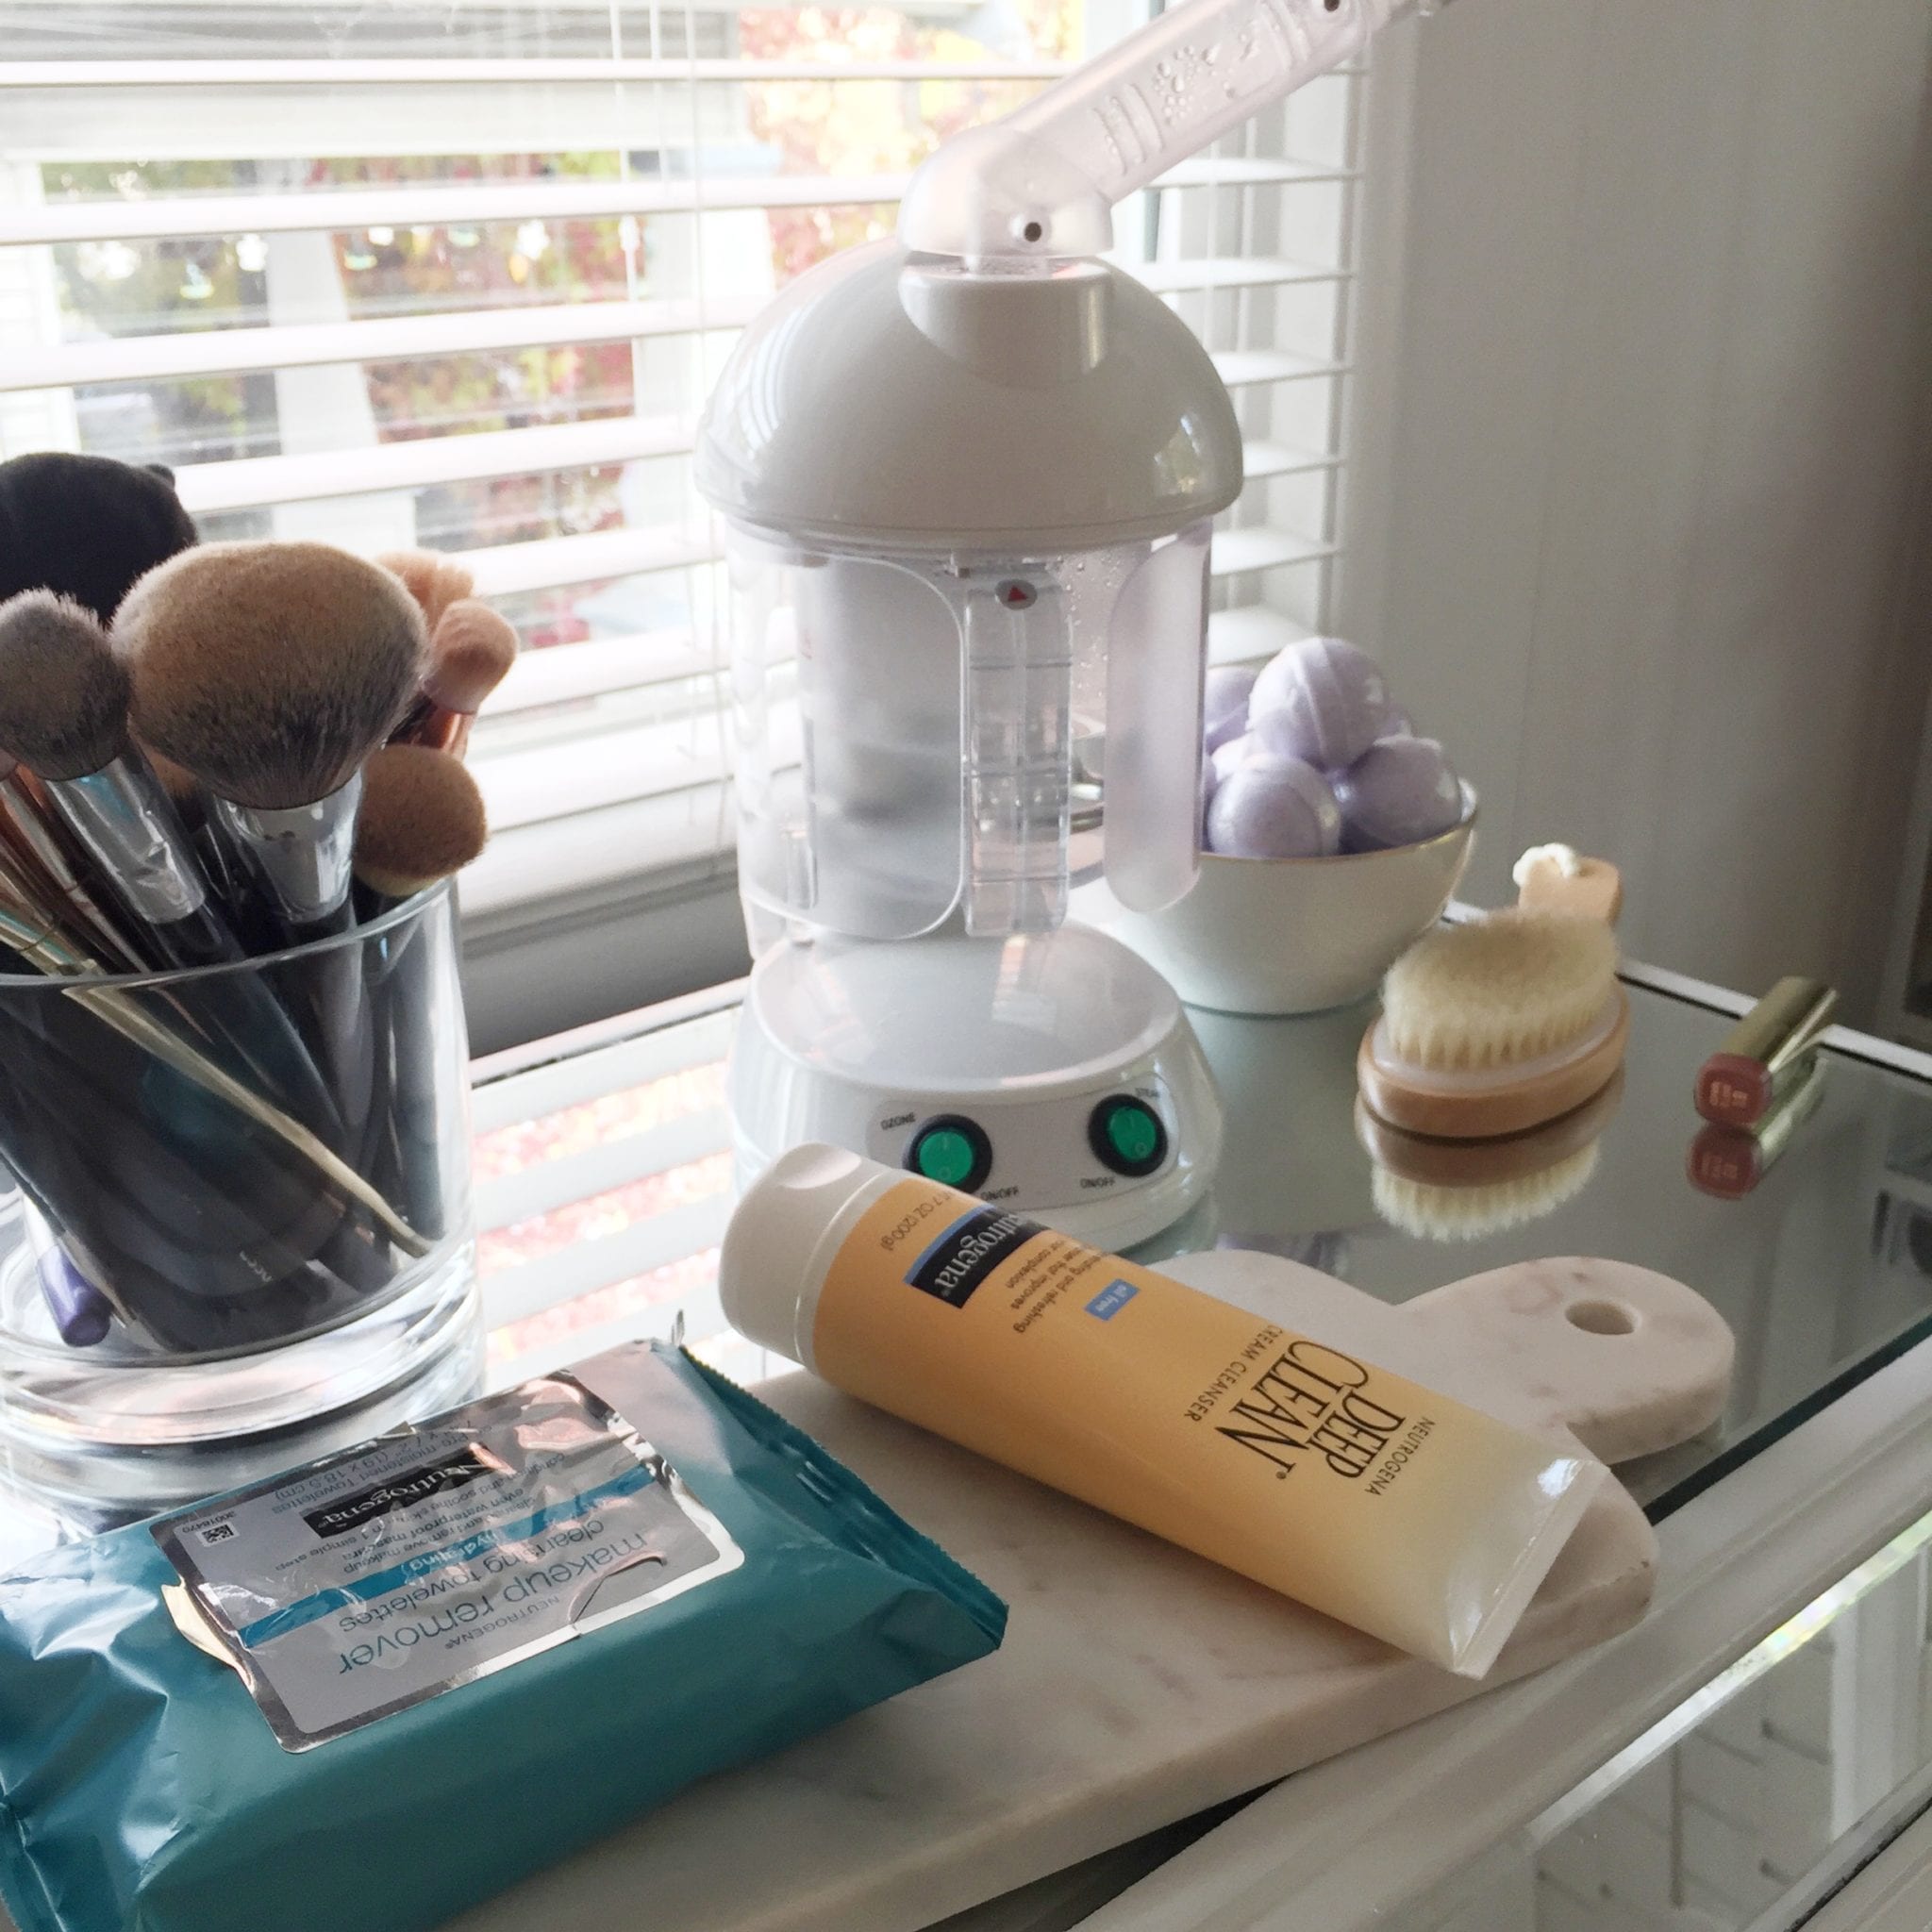 tips to deep clean skin featured by popular San Francisco beauty blogger, Just Add Glam